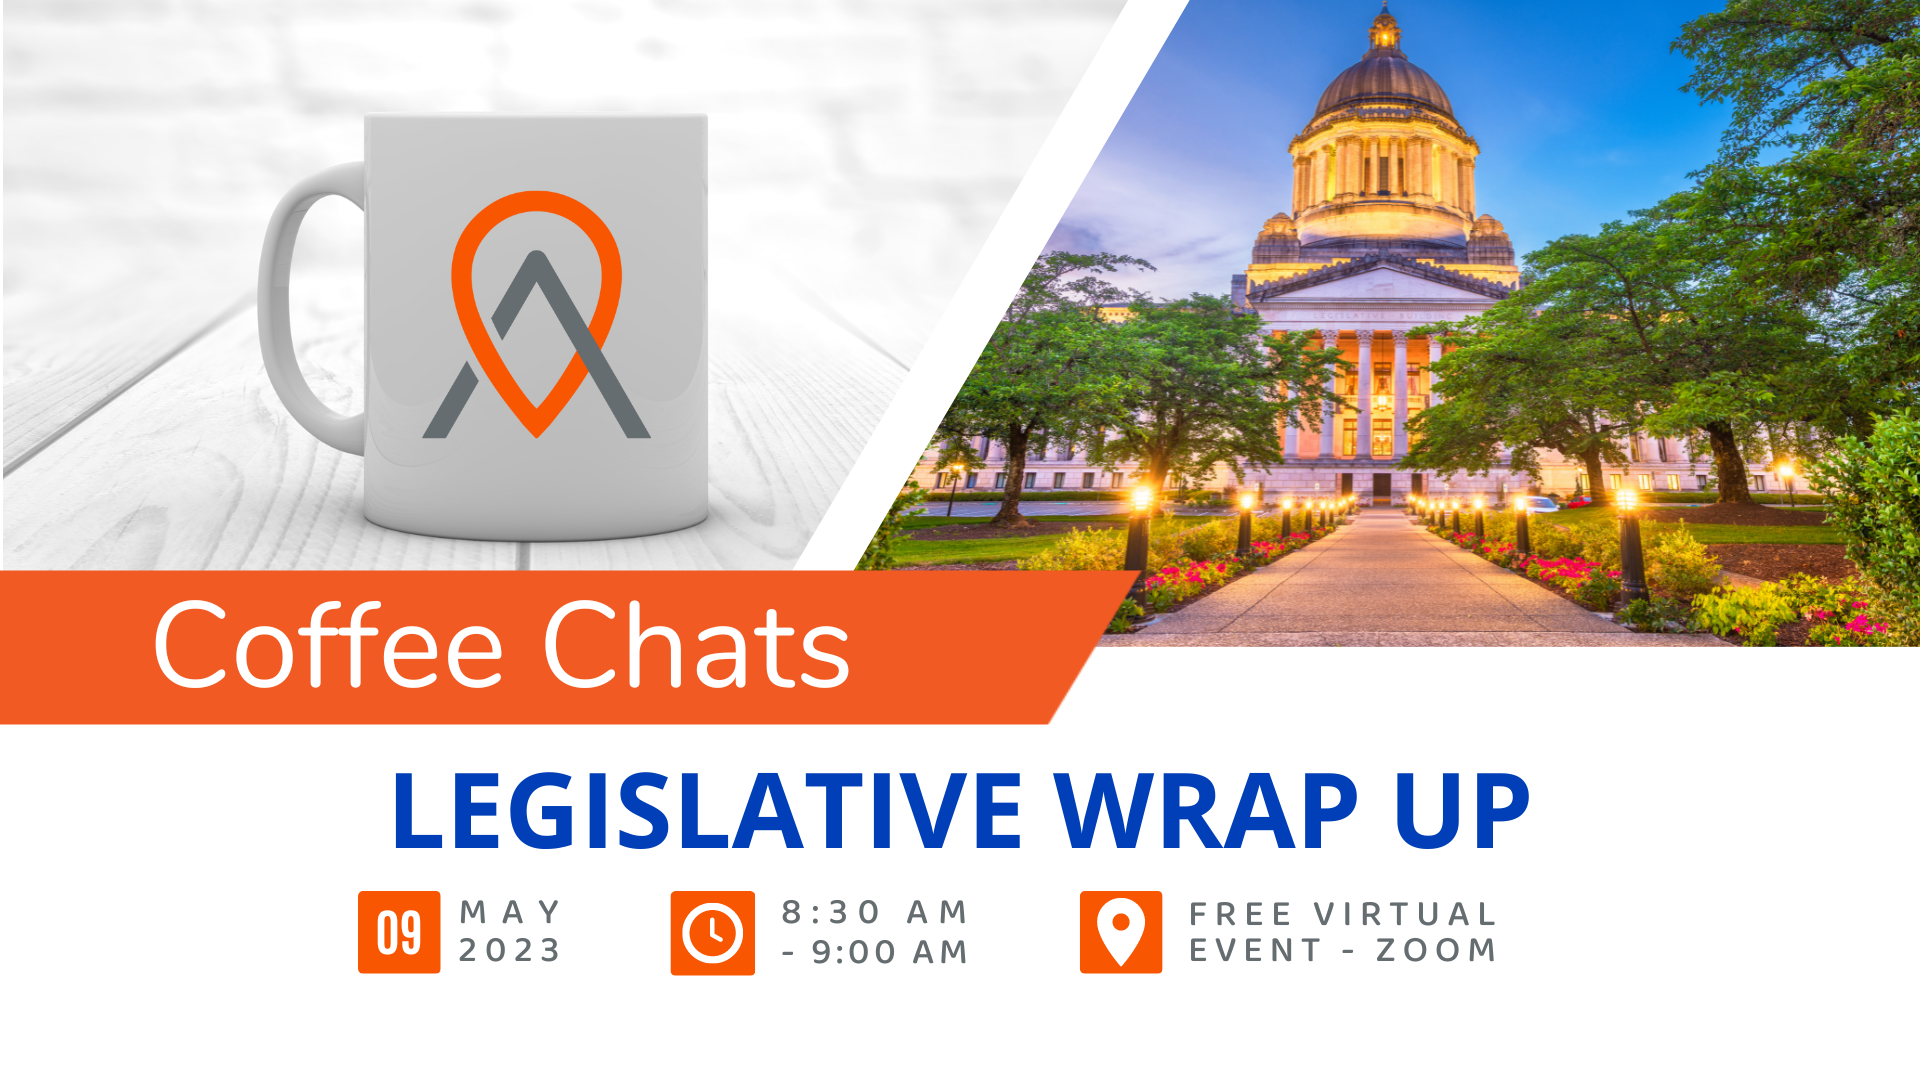 Event Promo Photo For Coffee Chats - Legislative Wrap Up